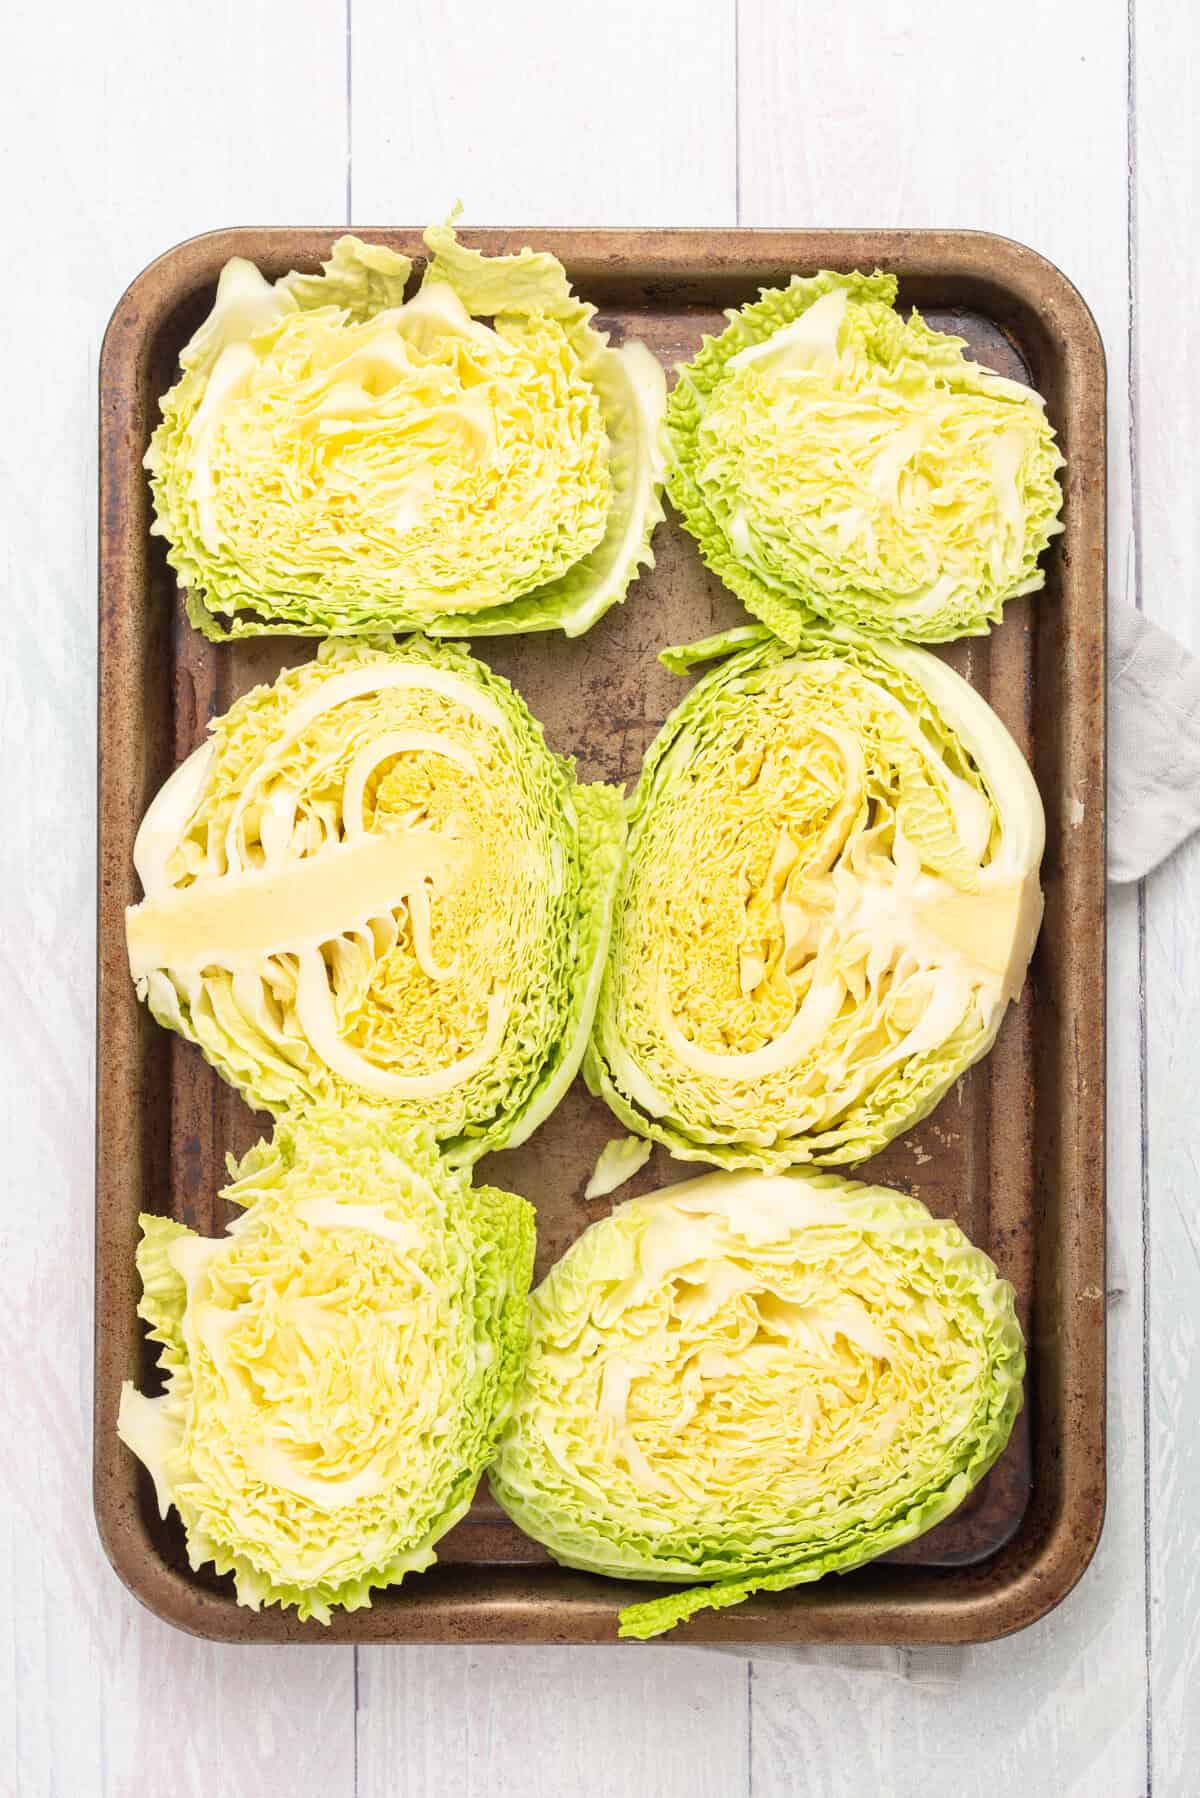 An image of cabbage steaks arranged in a baking sheet.